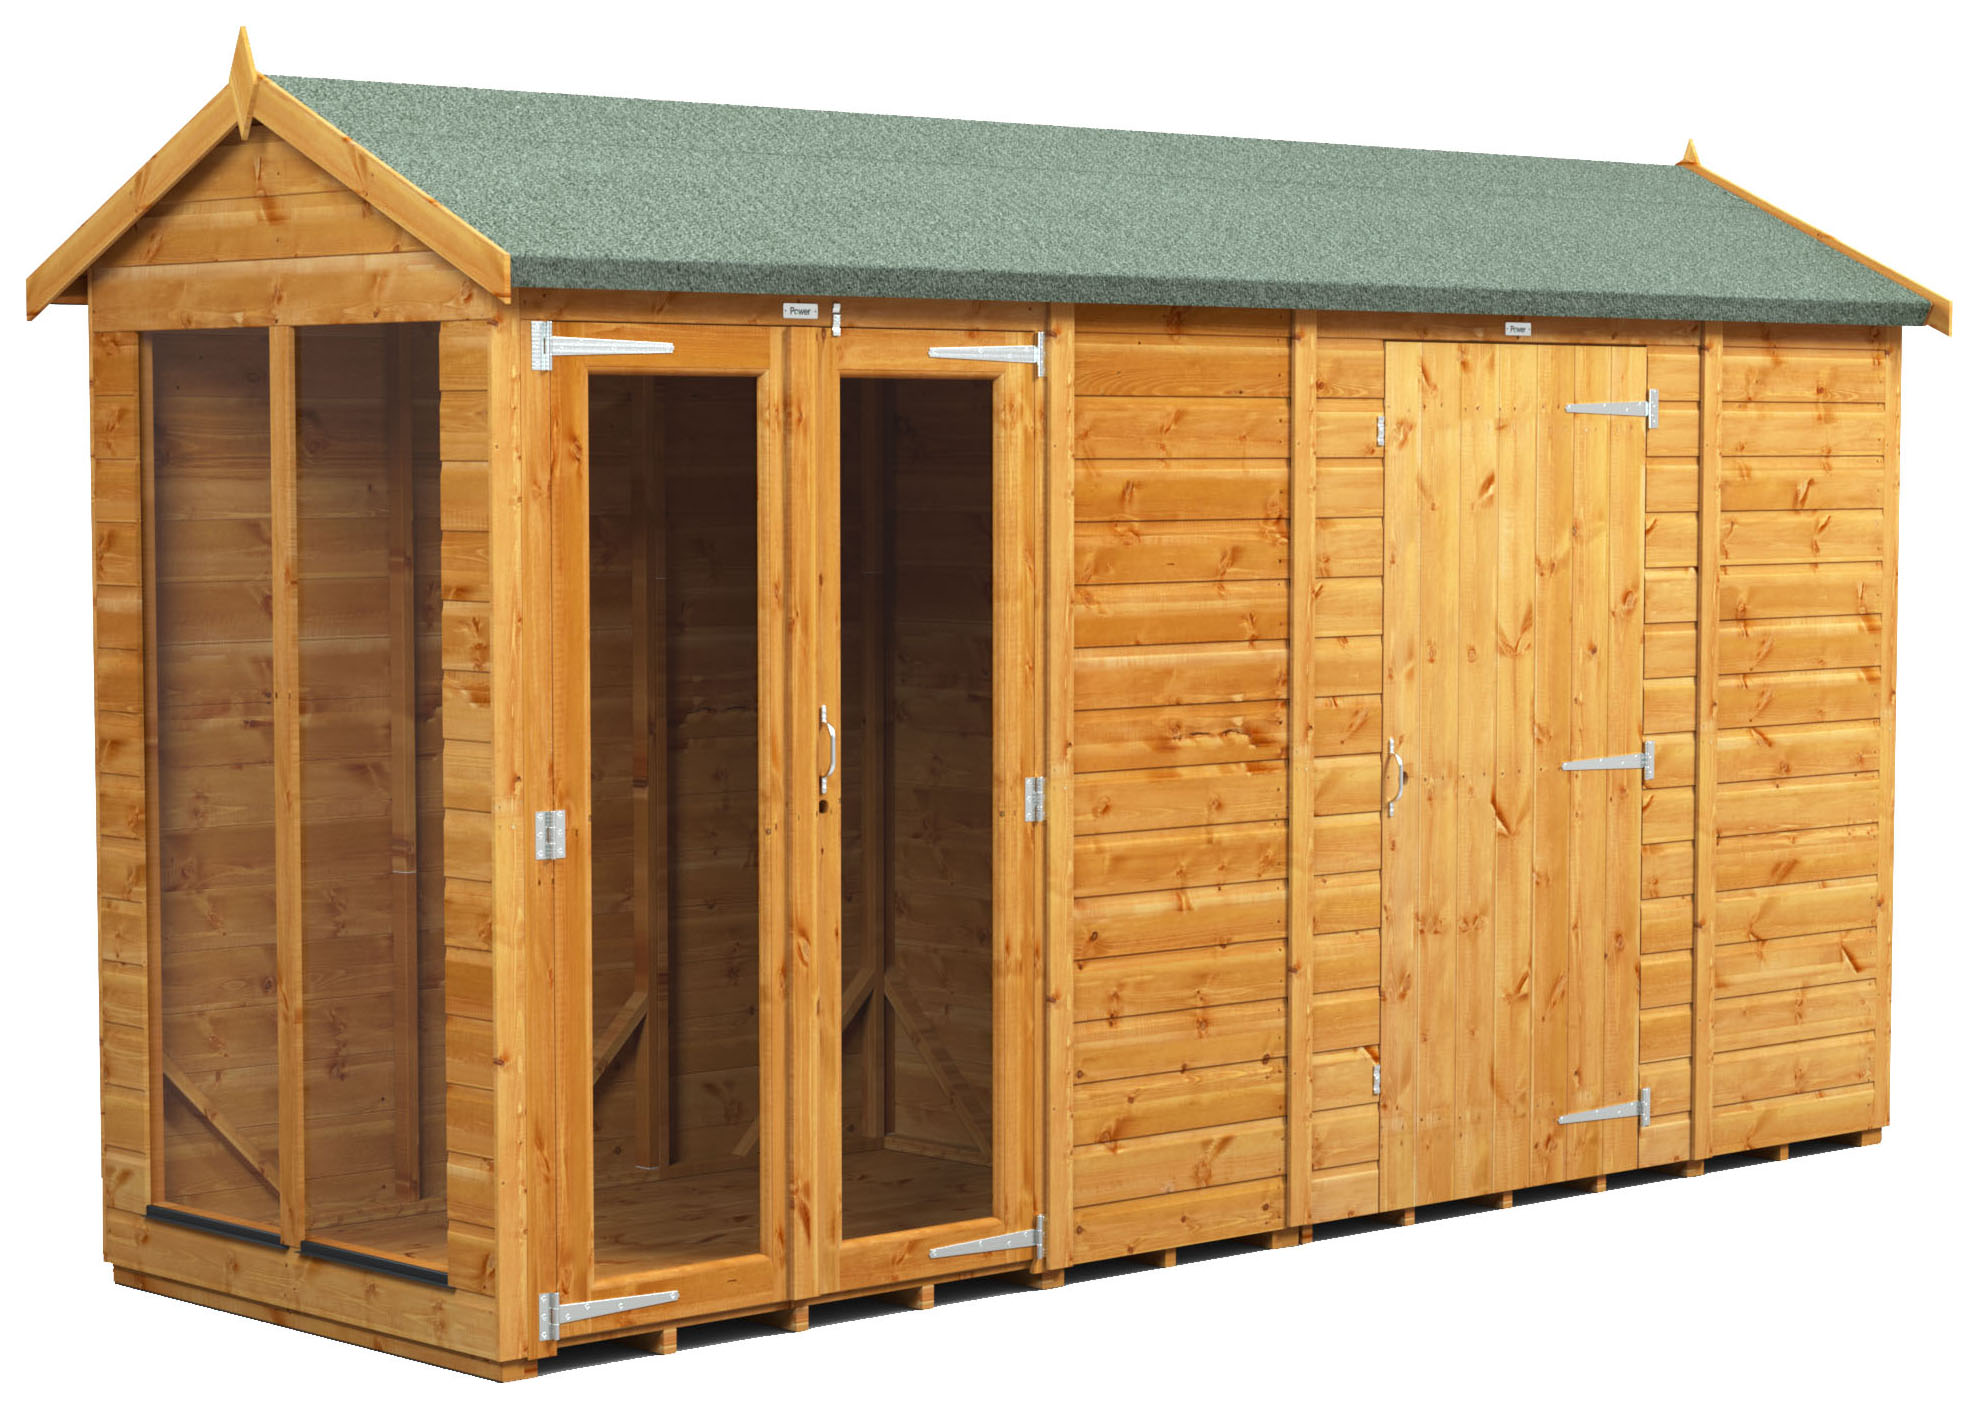 Image of Power Sheds 12 x 4ft Apex Shiplap Dip Treated Summerhouse - Including 6ft Side Store